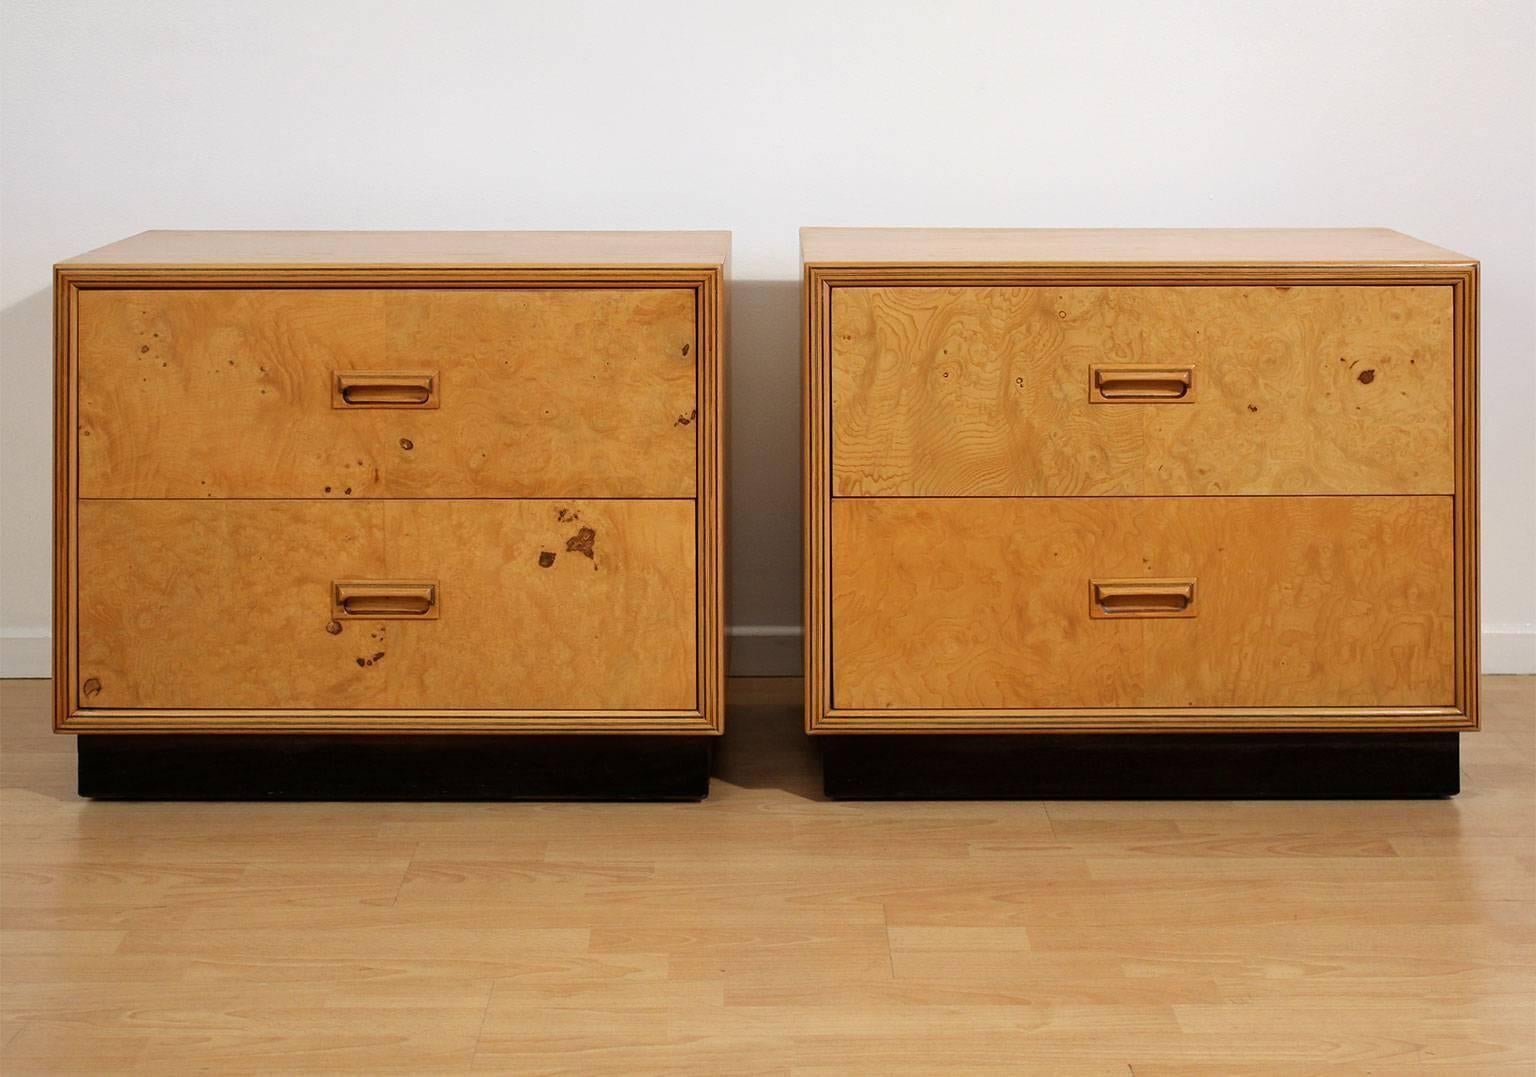 Great pair of Henredon scene two olive burl wood side tables/nightstands, circa 1970s. Both feature two drawers for ample storage. Burl wood is beautiful.